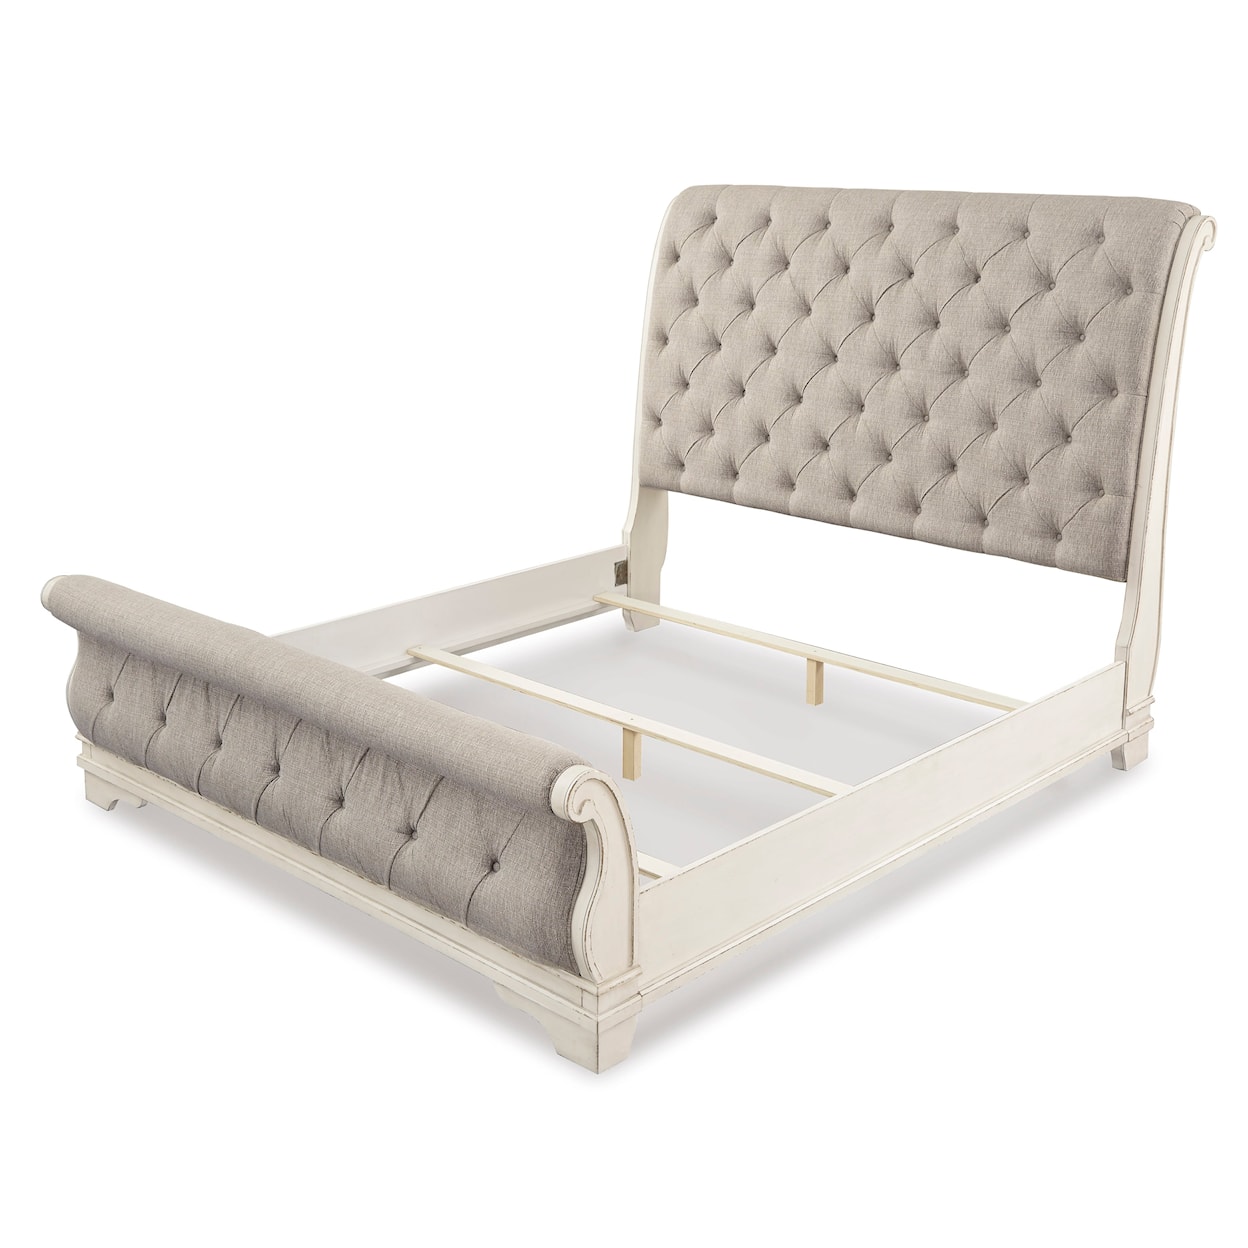 Signature Design by Ashley Realyn Queen Upholstered Sleigh Bed